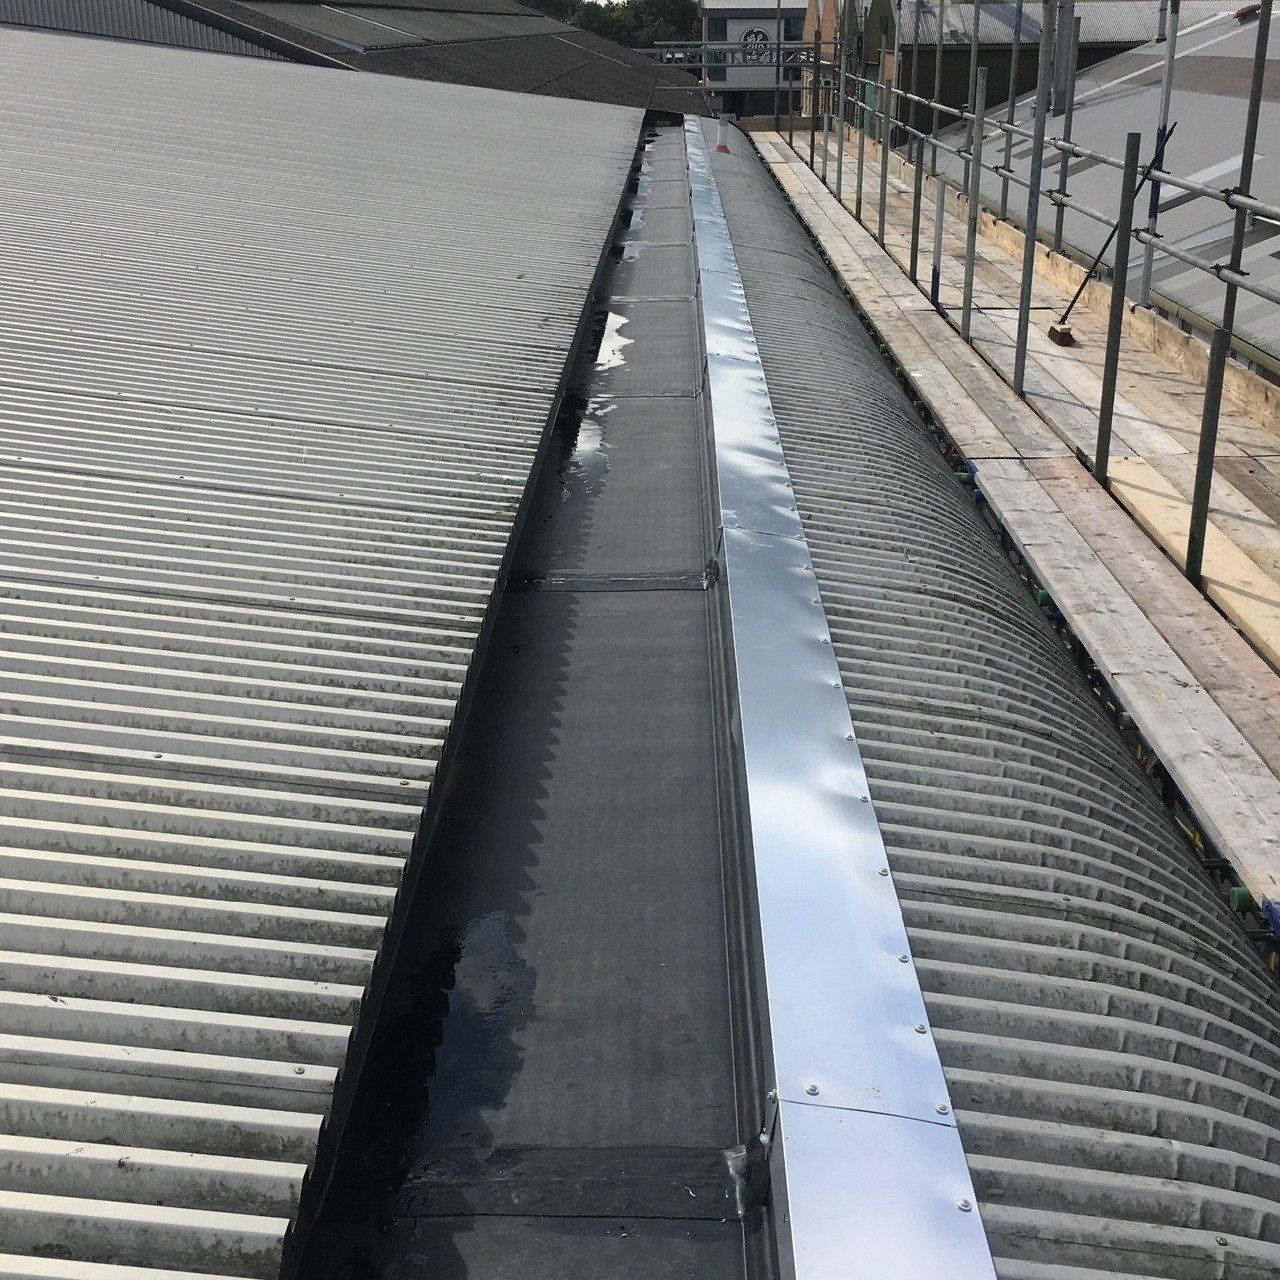 Gutter repair and maintenance services for commercial and industrial properties